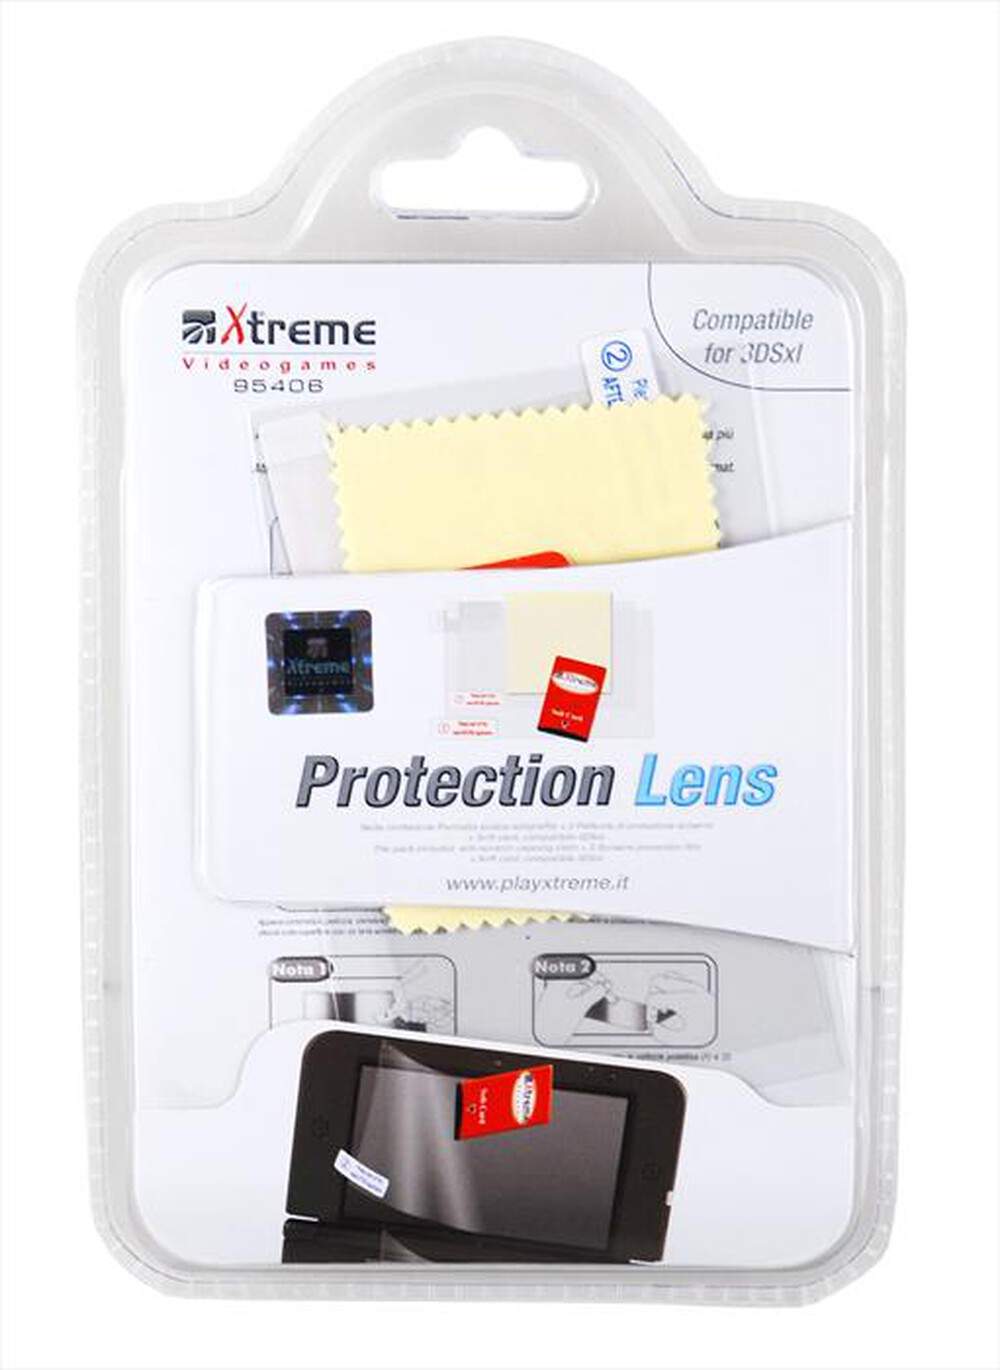 "XTREME - 95406 - Protection Lens"